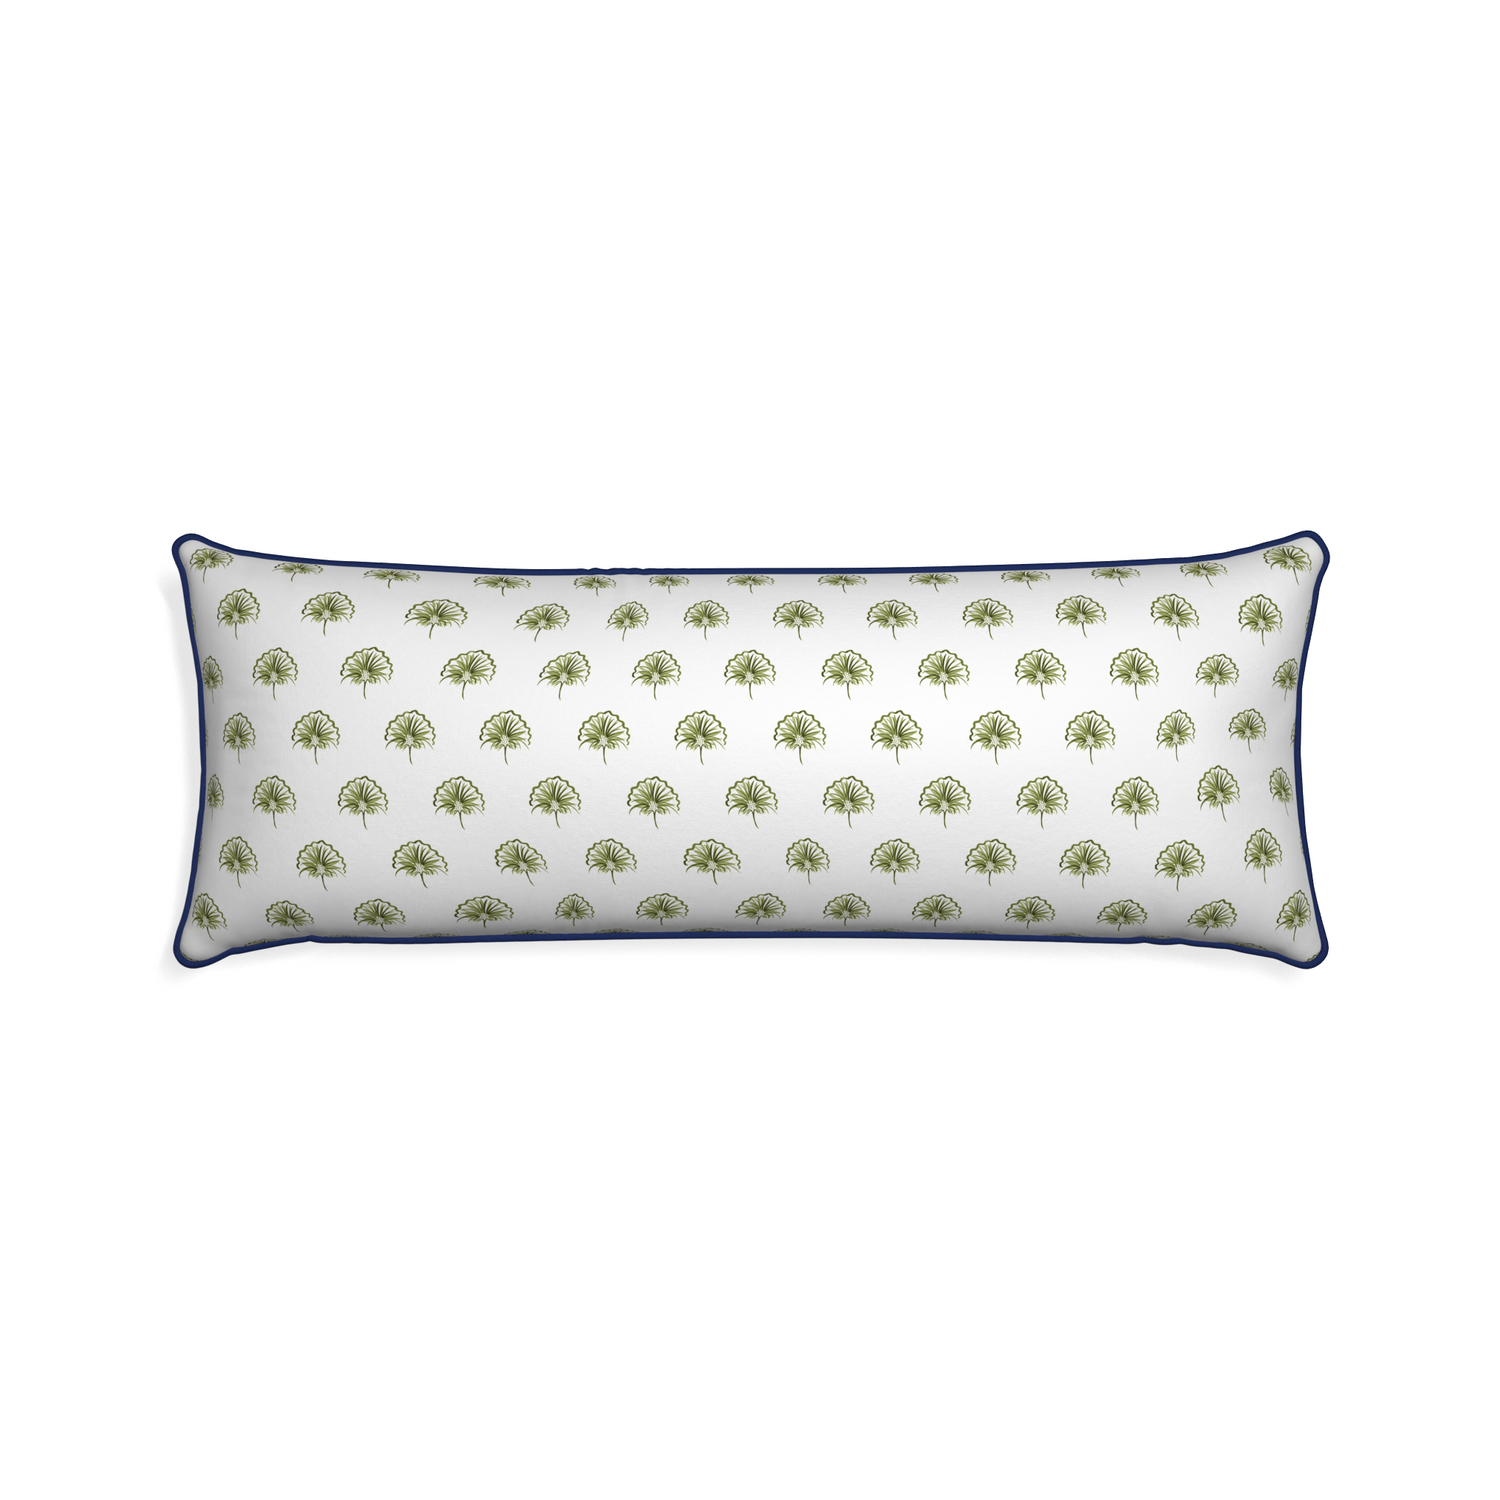 Xl-lumbar penelope moss custom green floralpillow with midnight piping on white background